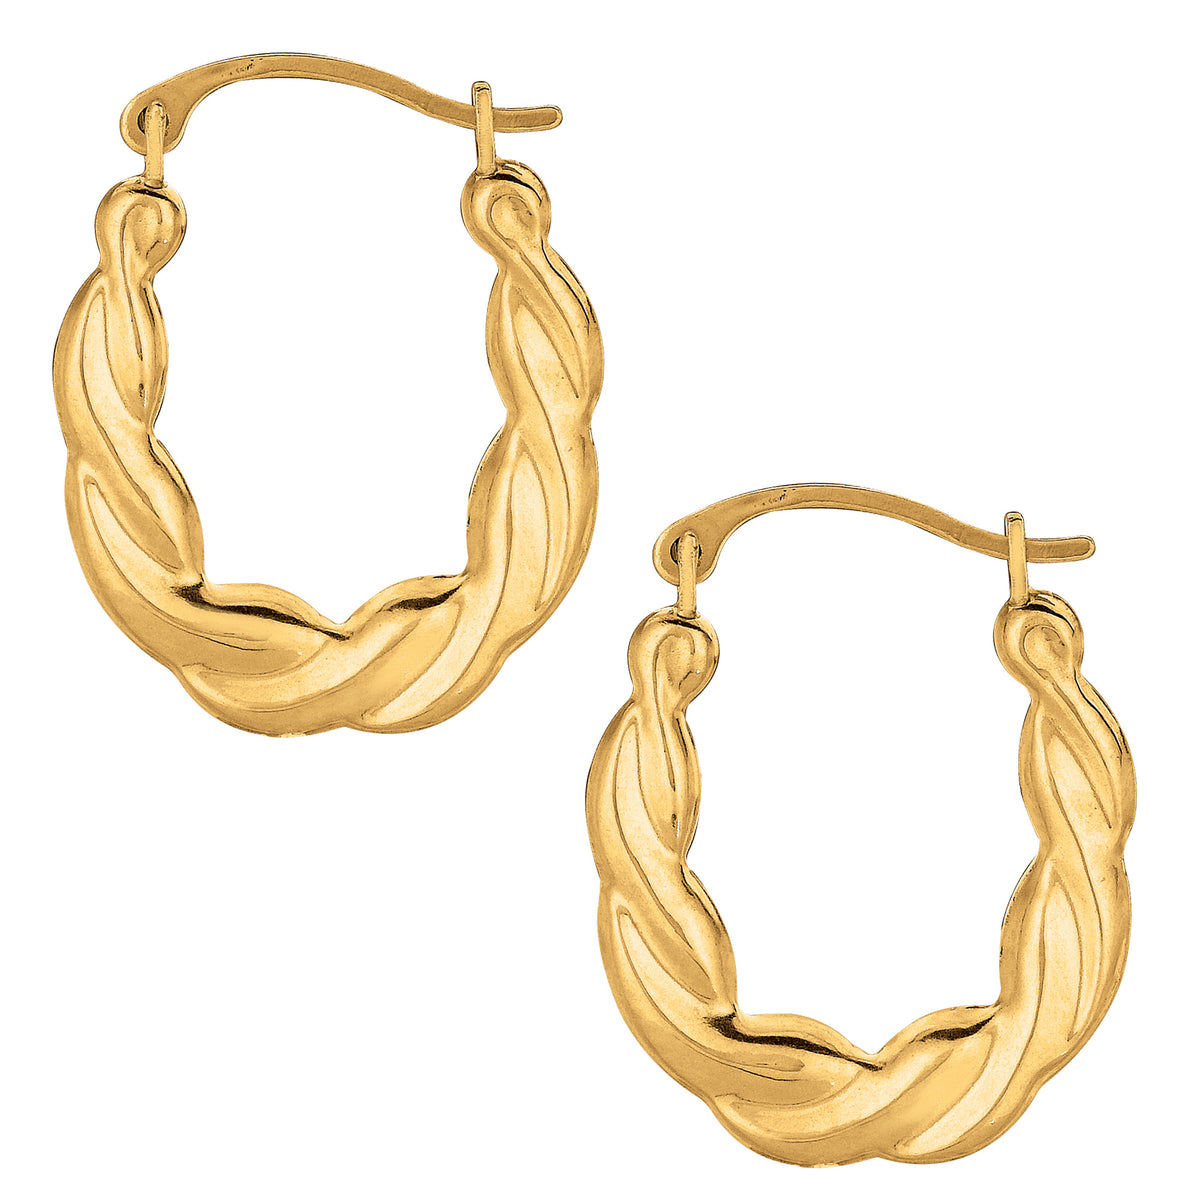 10k Yellow Gold Shiny Twisted Oval Hoop Earrings, Diameter 20mm fine designer jewelry for men and women